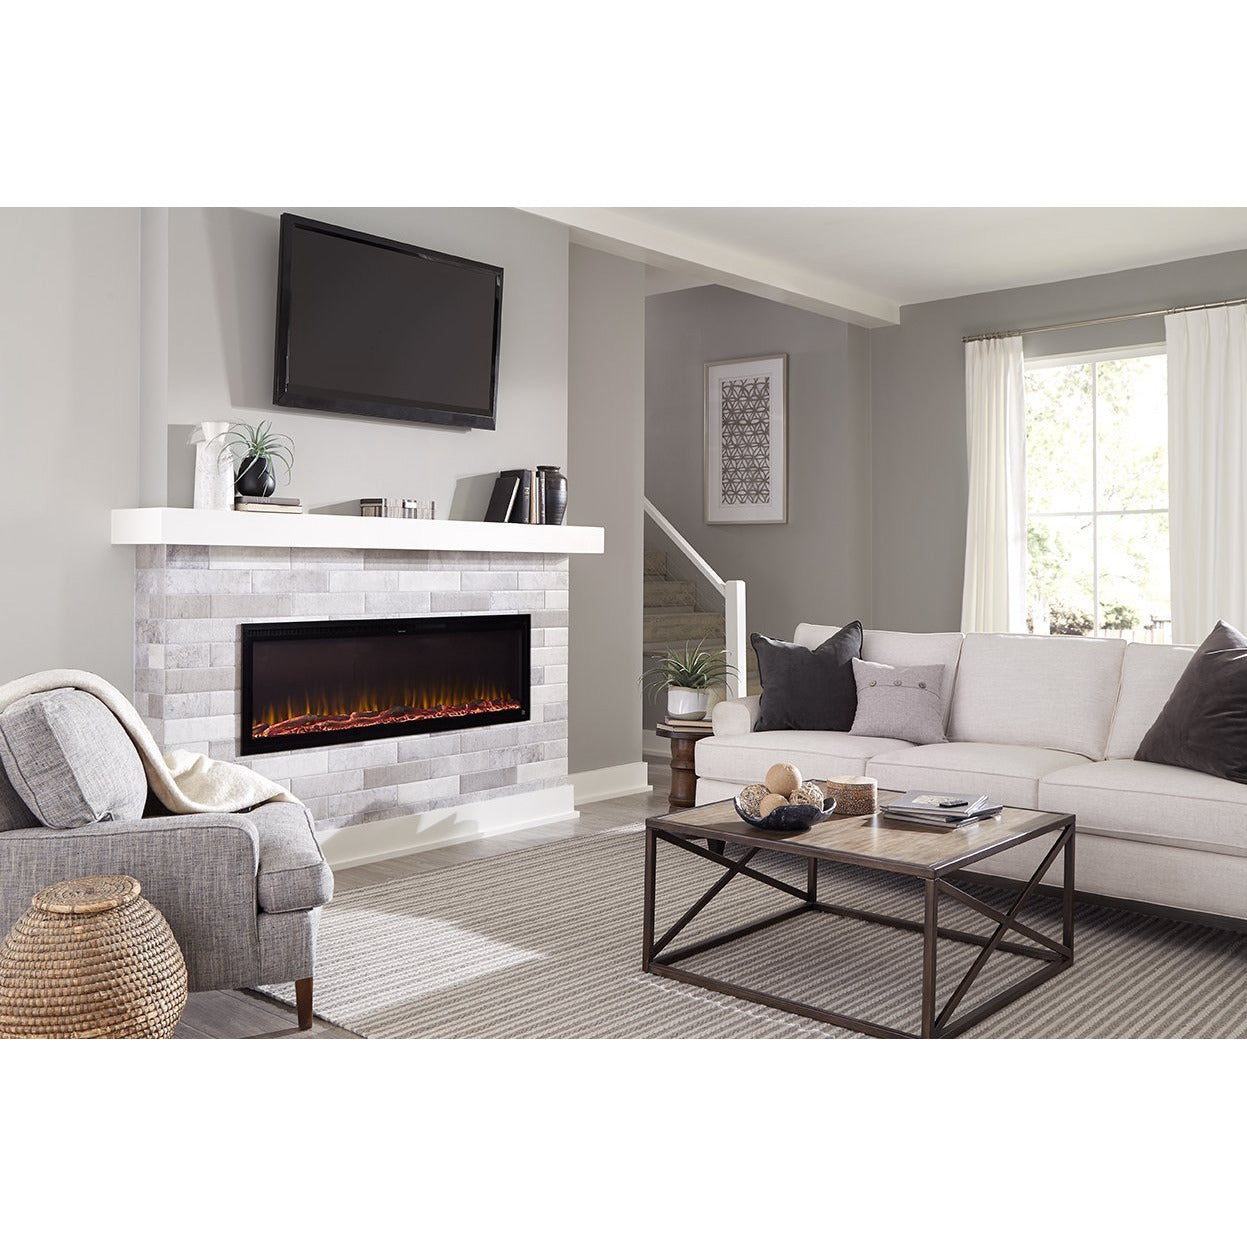 Cozy living room with Sideline Elite 72" Recessed Electric Fireplace with green flame– Very Good Fireplaces.